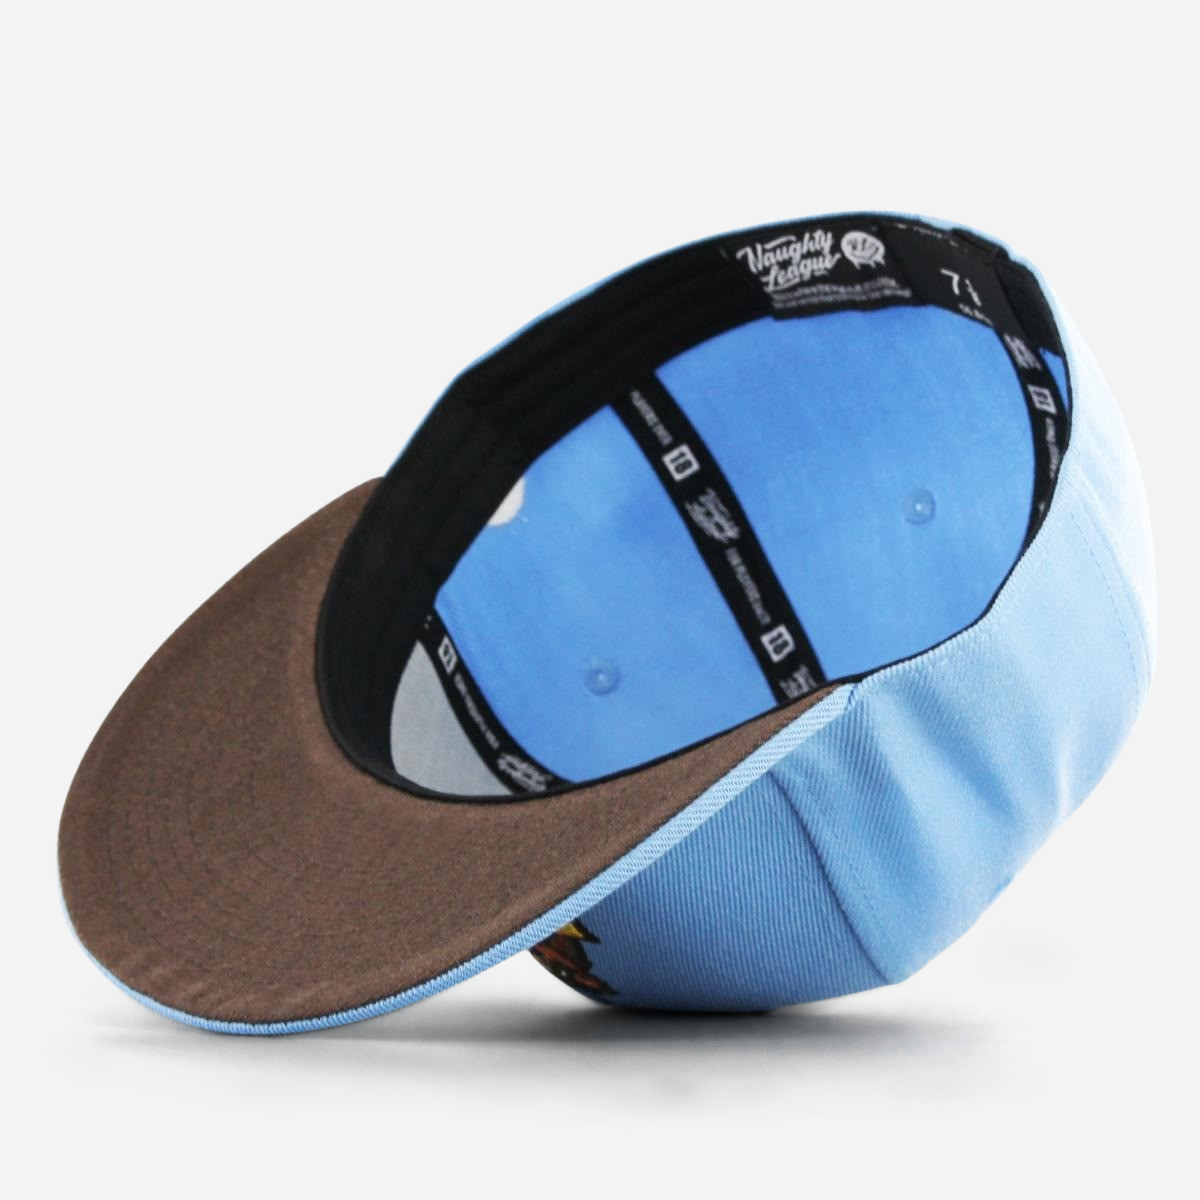 Boston Beaver Hunters Fitted Baby Blue